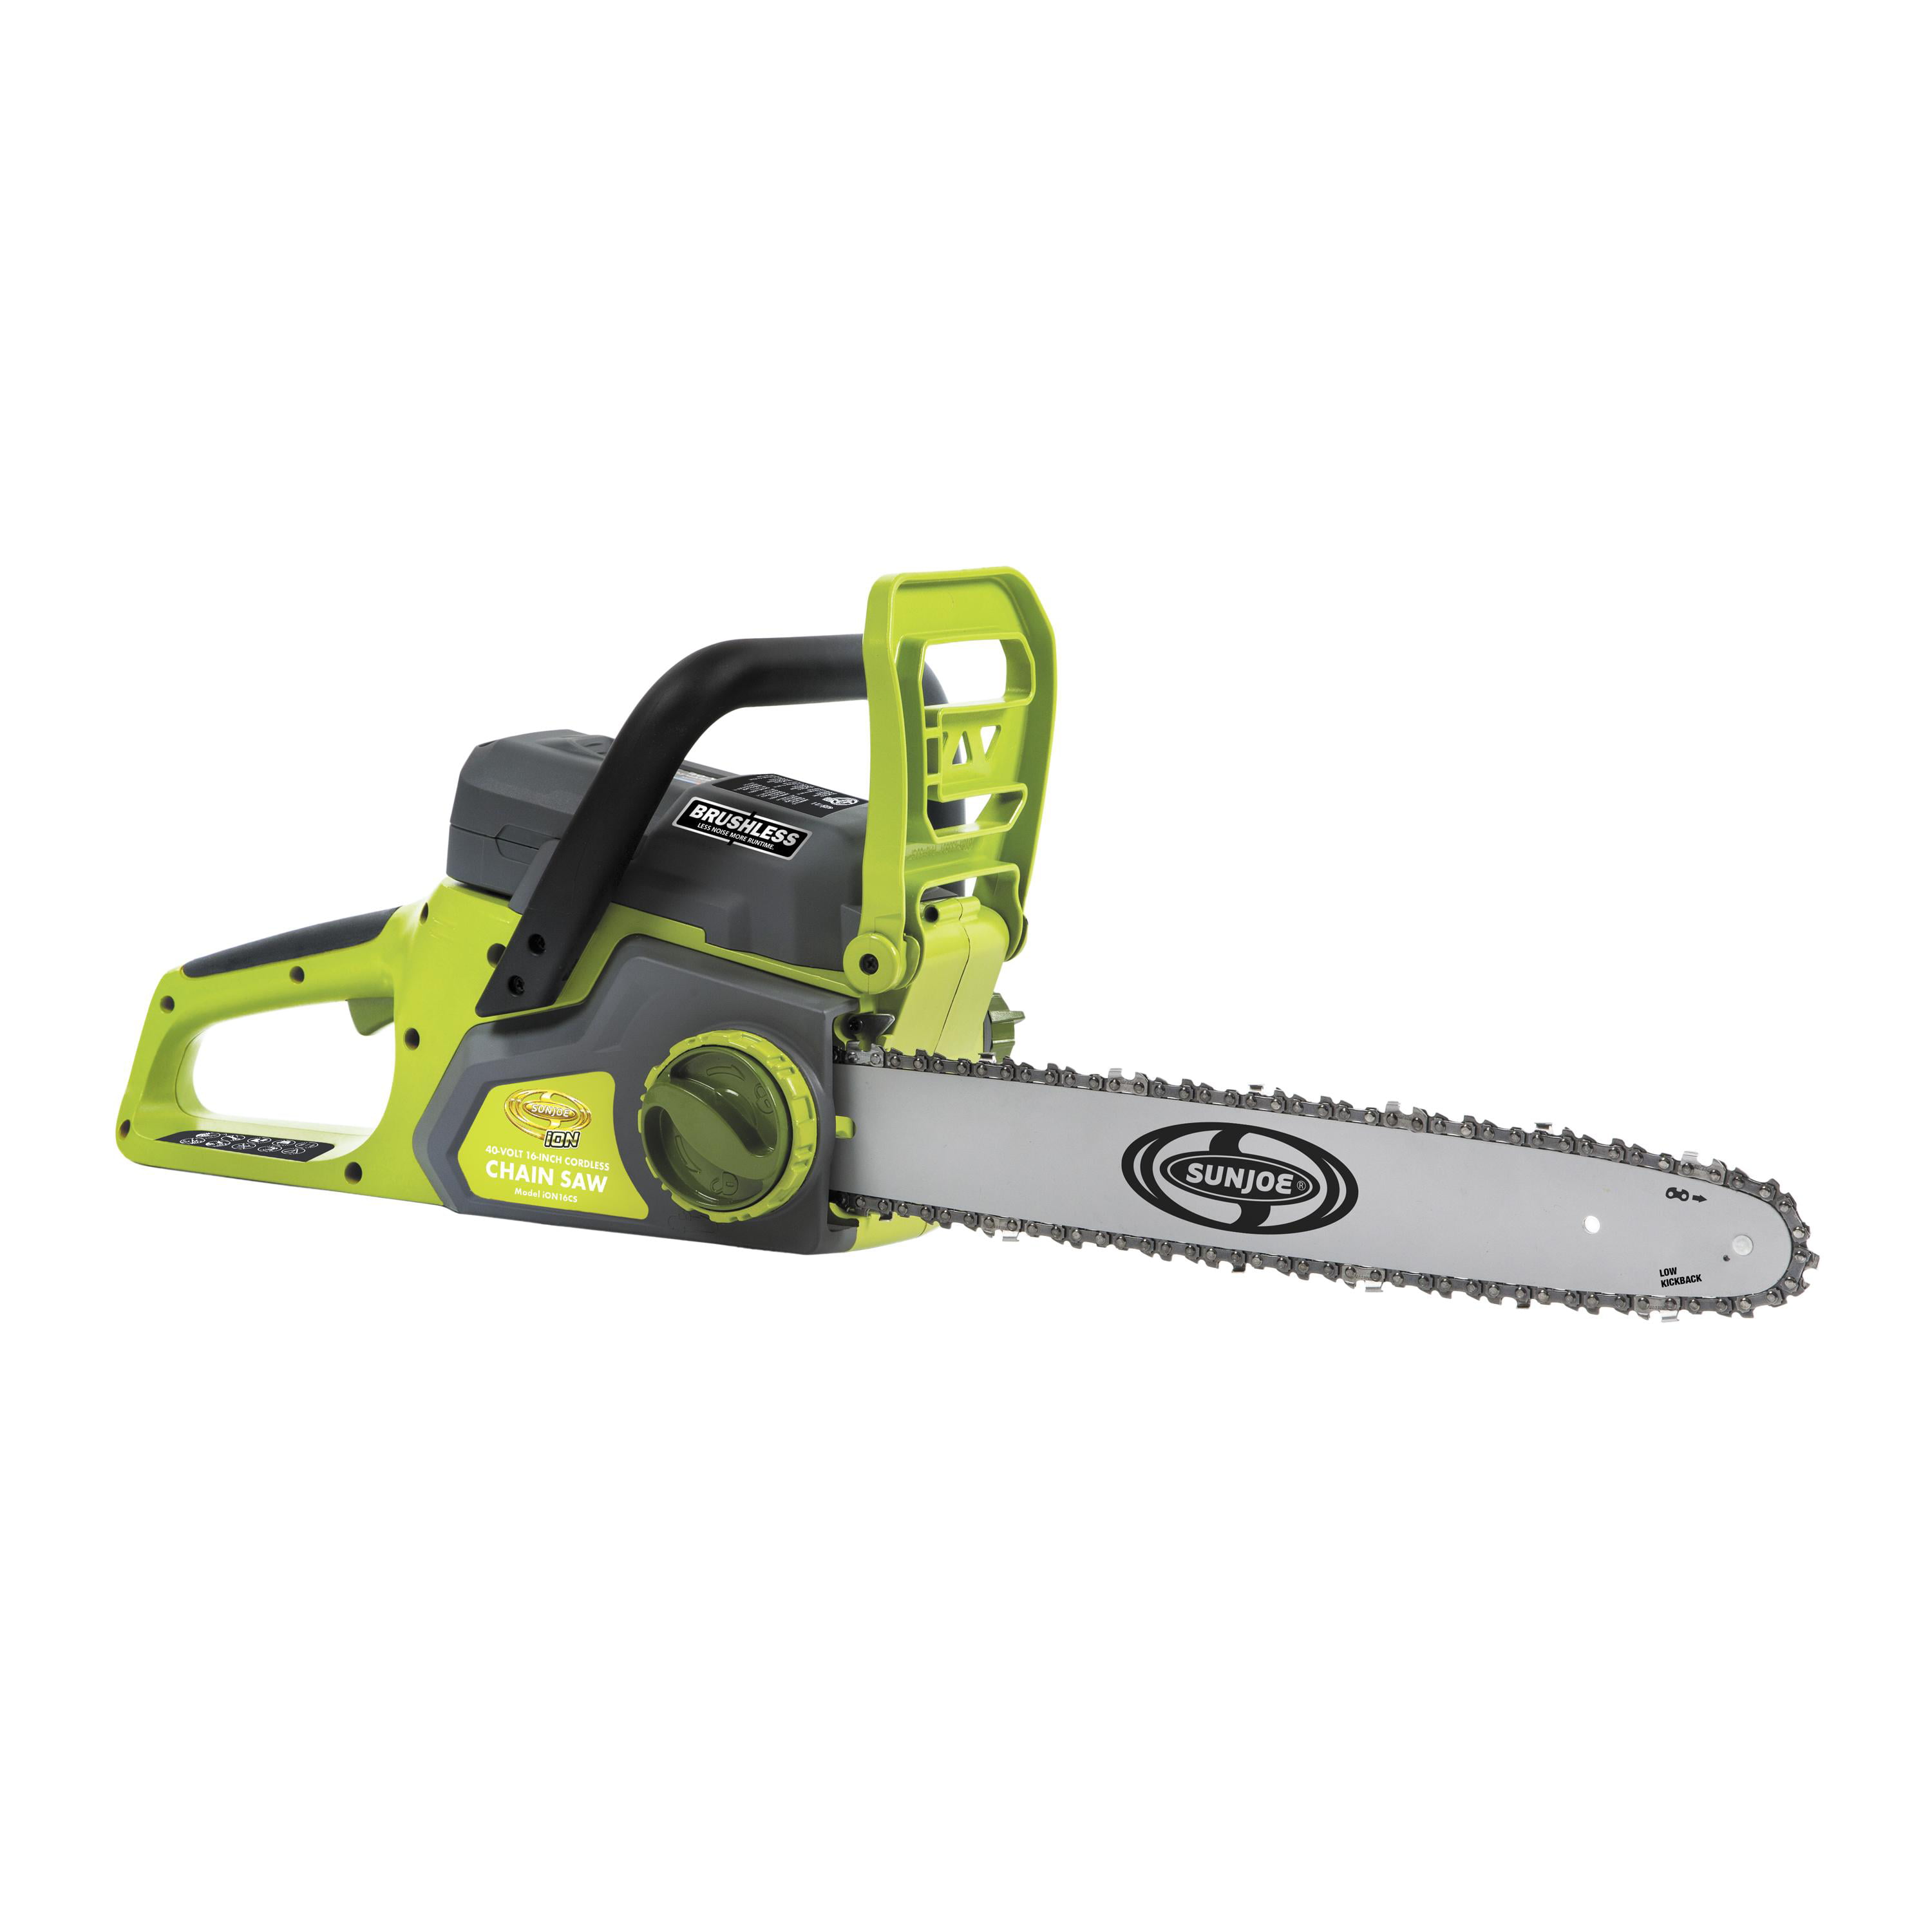 2.0 AH Battery Included 20362 Greenworks 10-Inch 24V Cordless Chainsaw